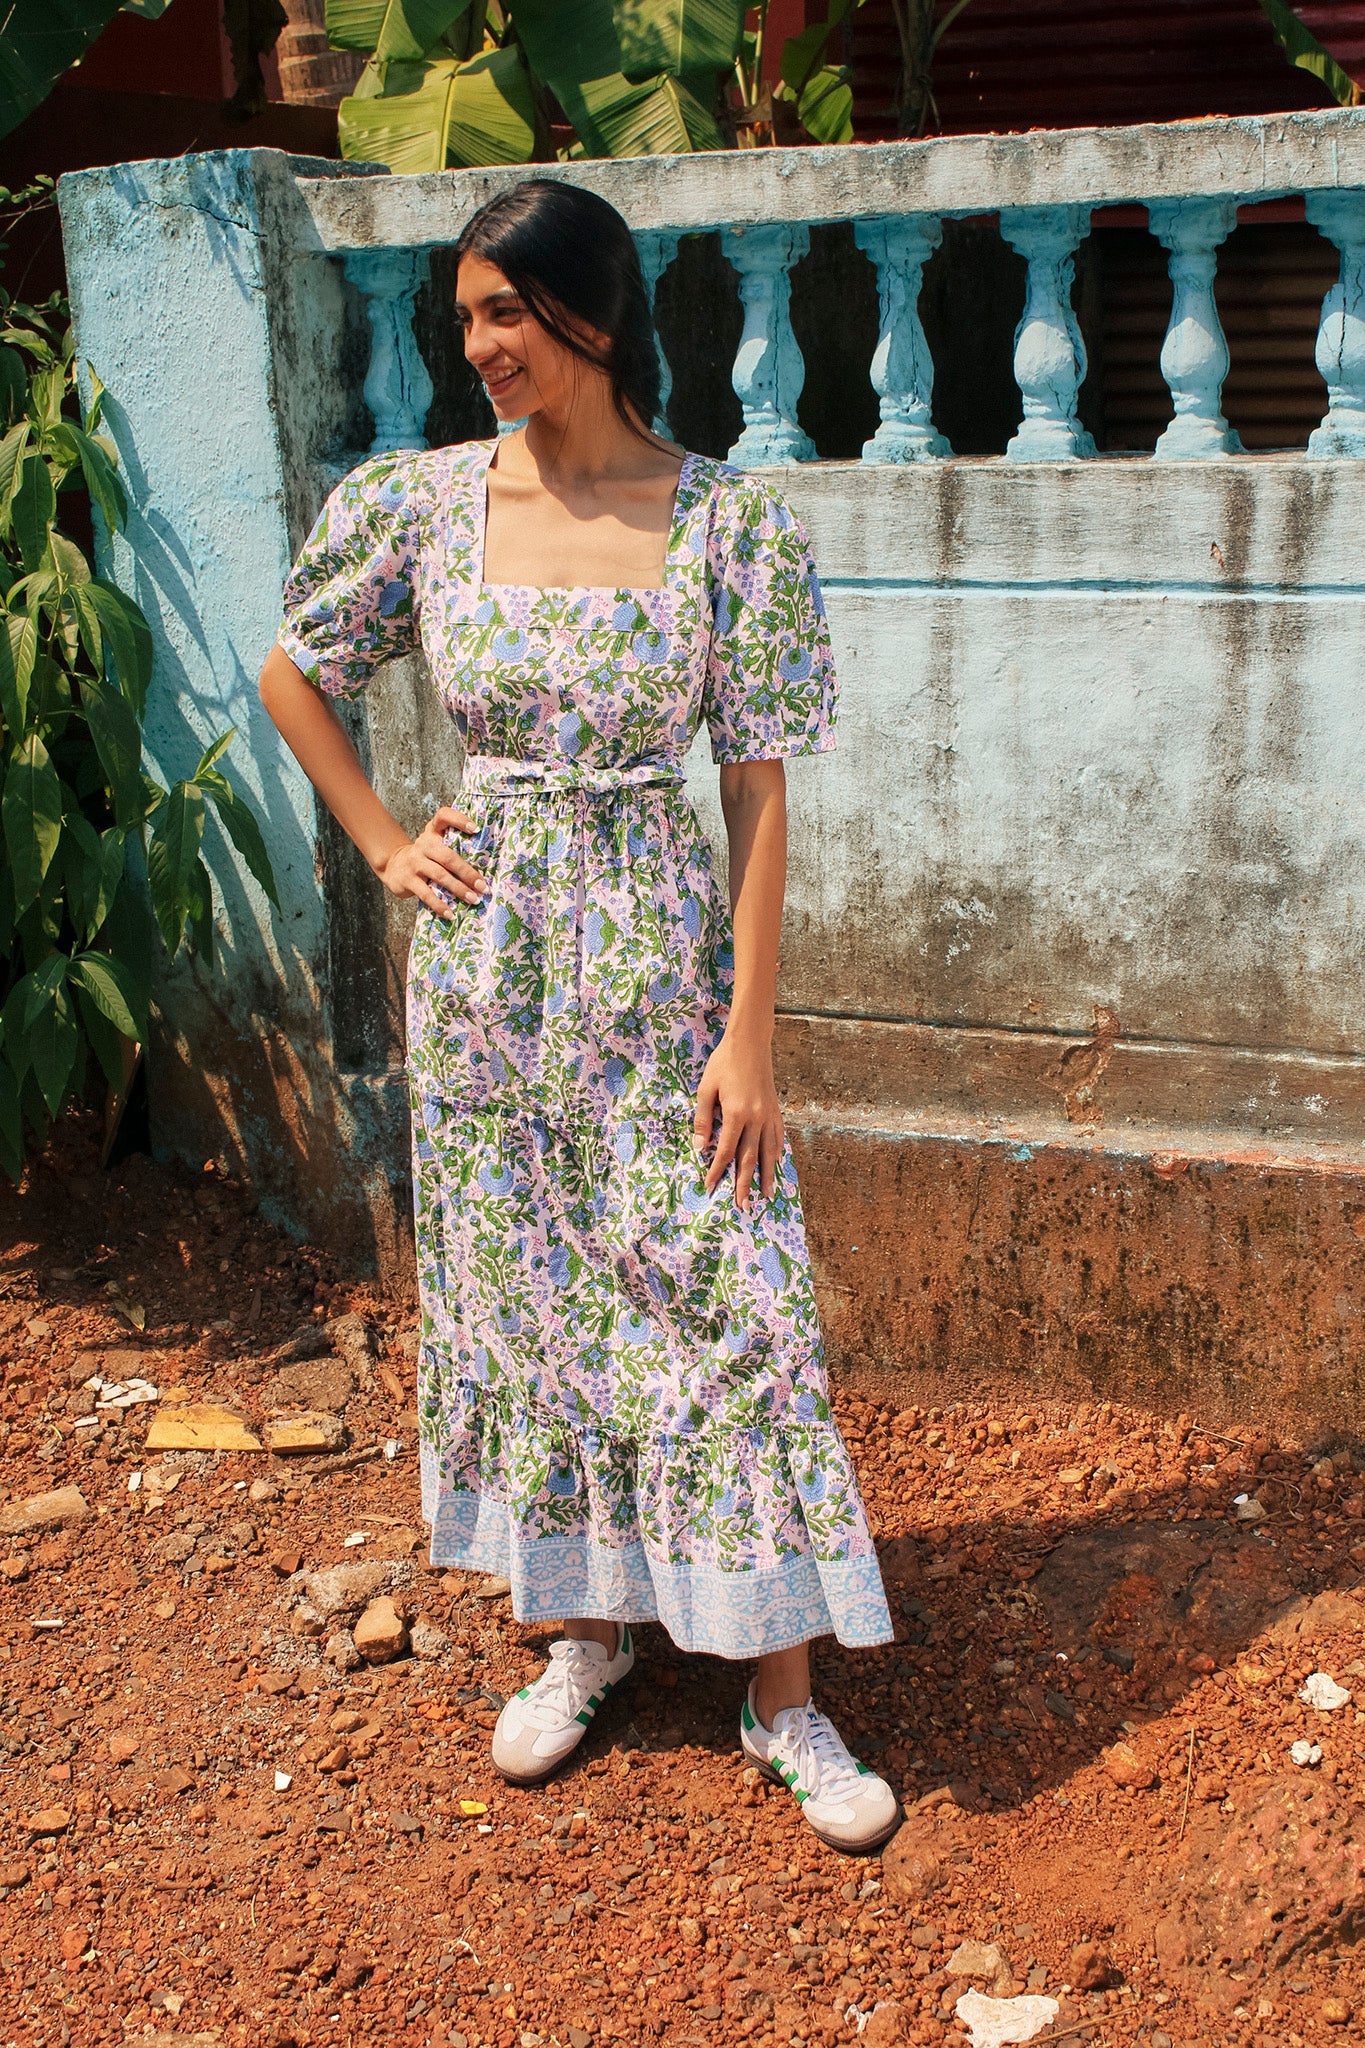 A woman stands outdoors wearing the Divya Dress - Cornflower Blue from SZ Blockprints and white sneakers. She has dark hair tied back and is posed with one hand on her hip in front of a blue wall.